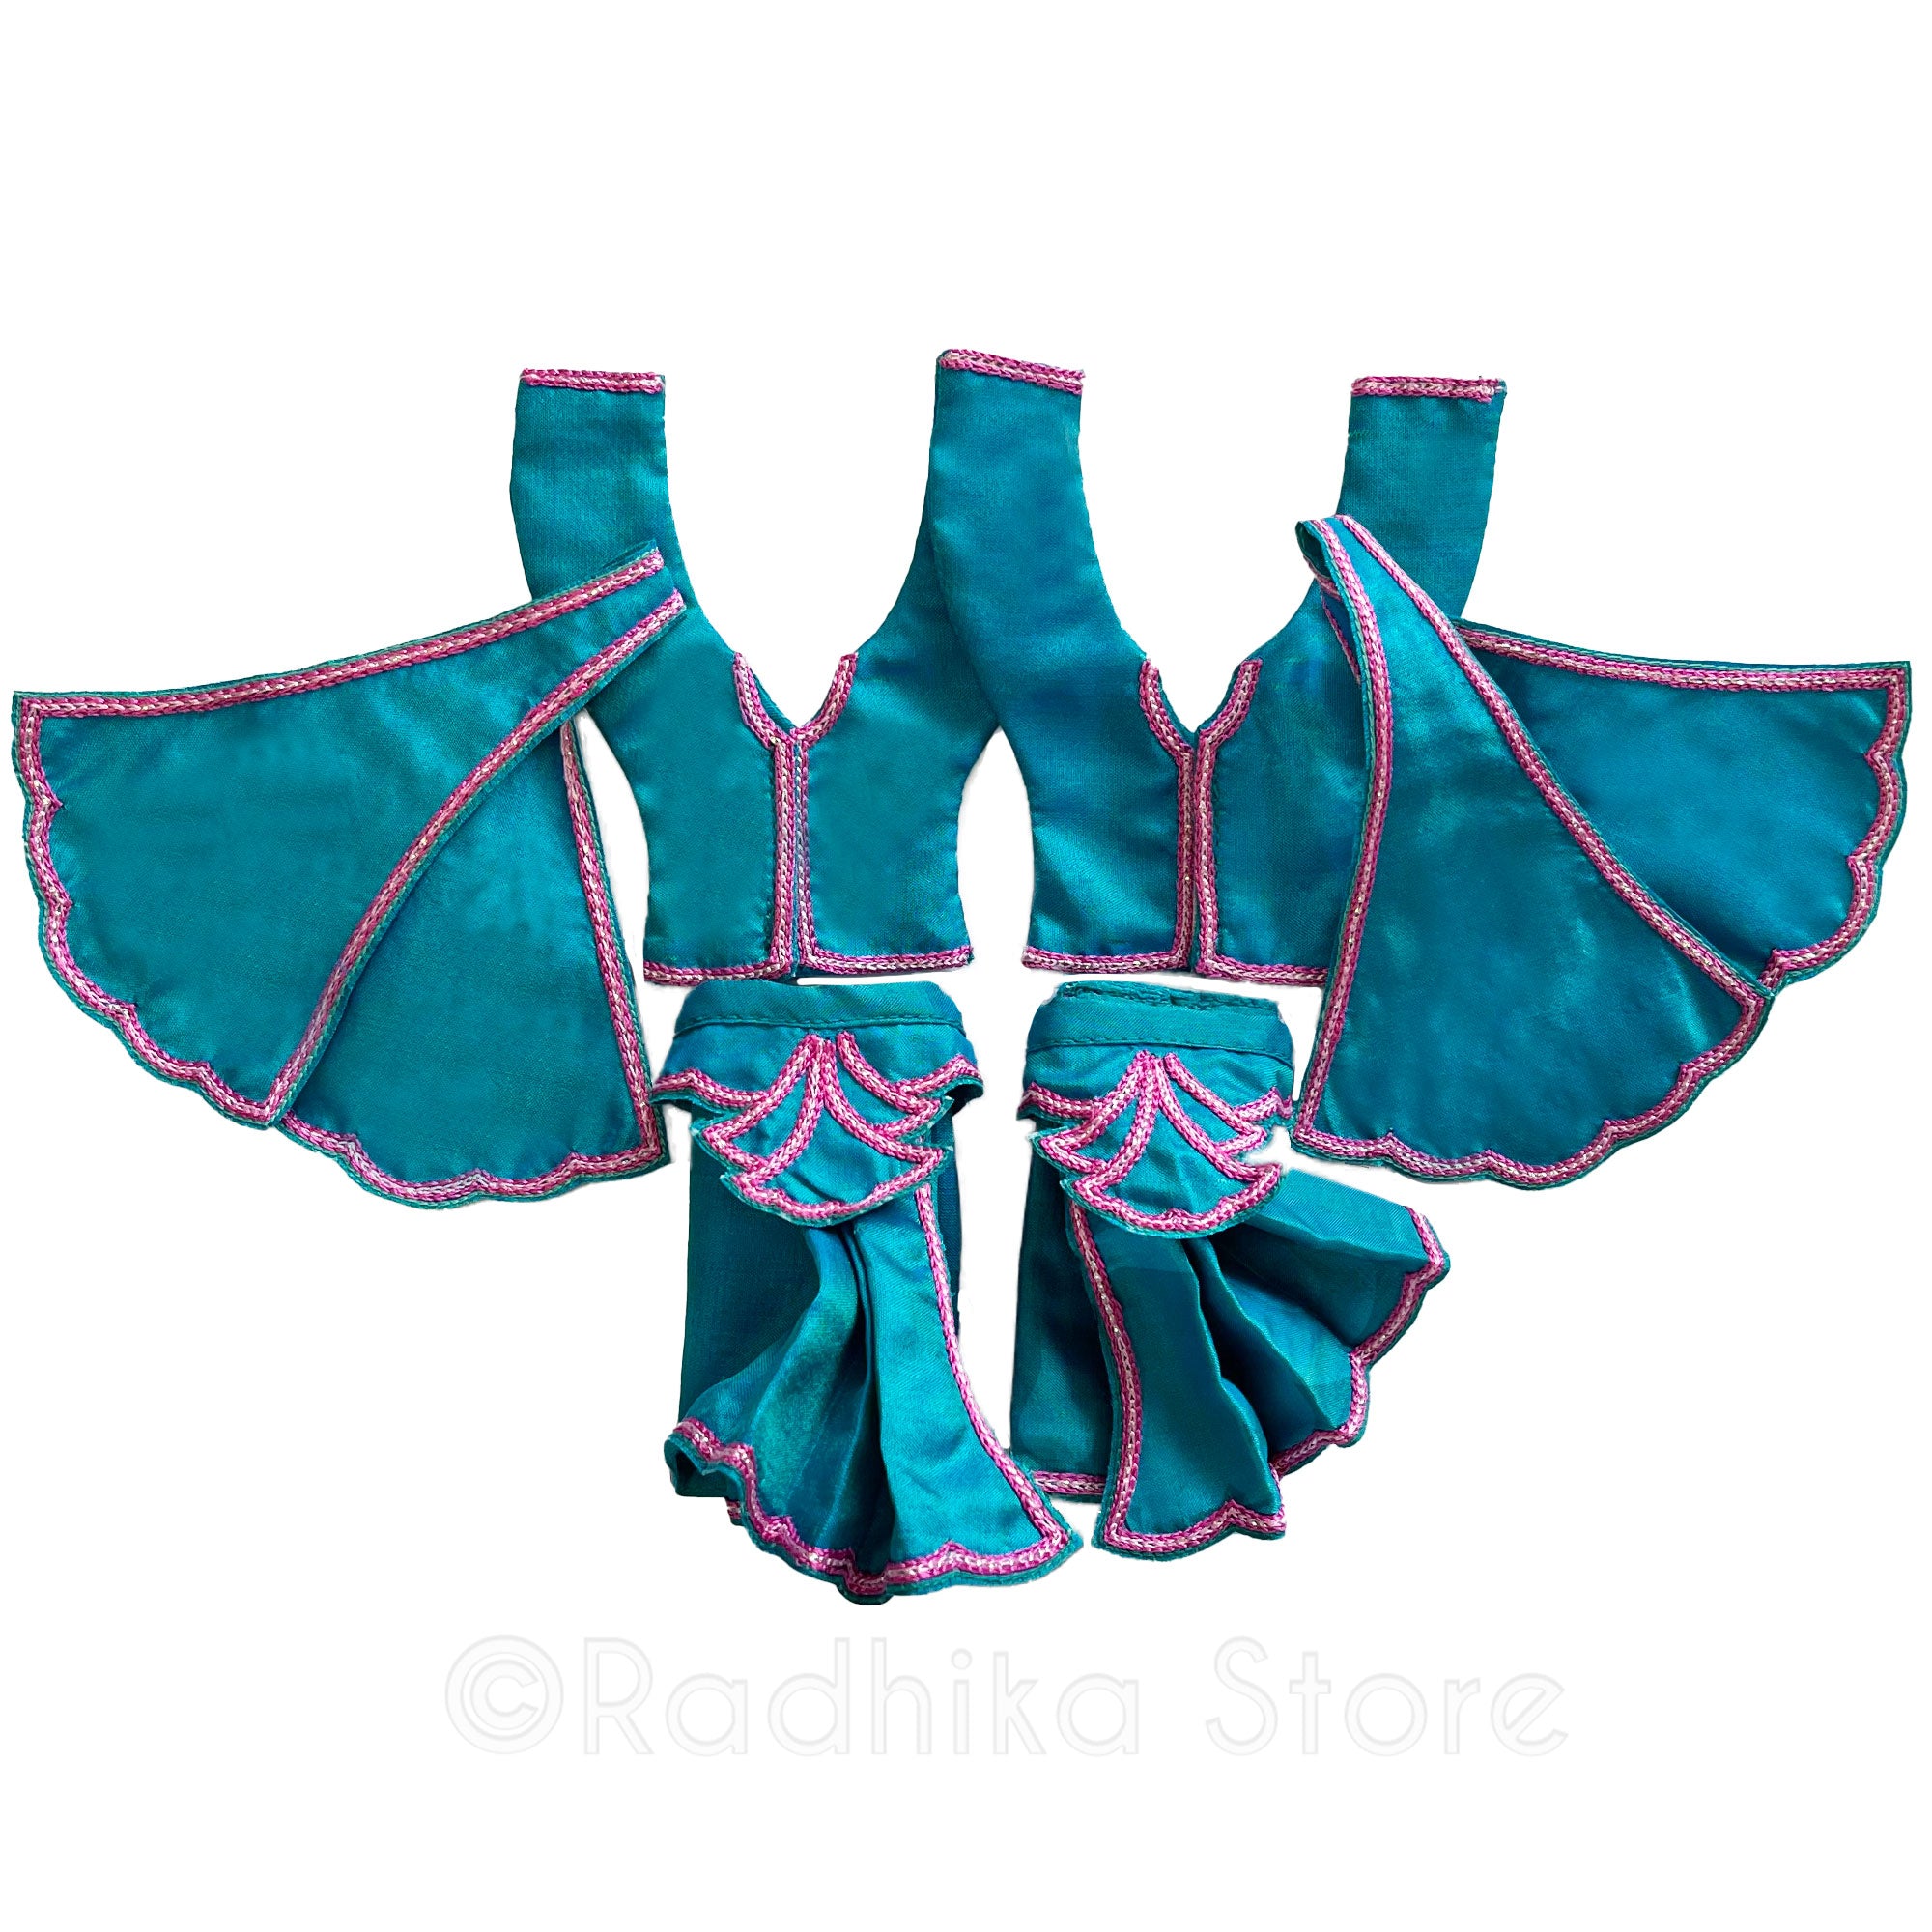 Oceans Of Mercy - Silk - Deep Teal Blue and Pink - Gaura Nitai Deity Outfit